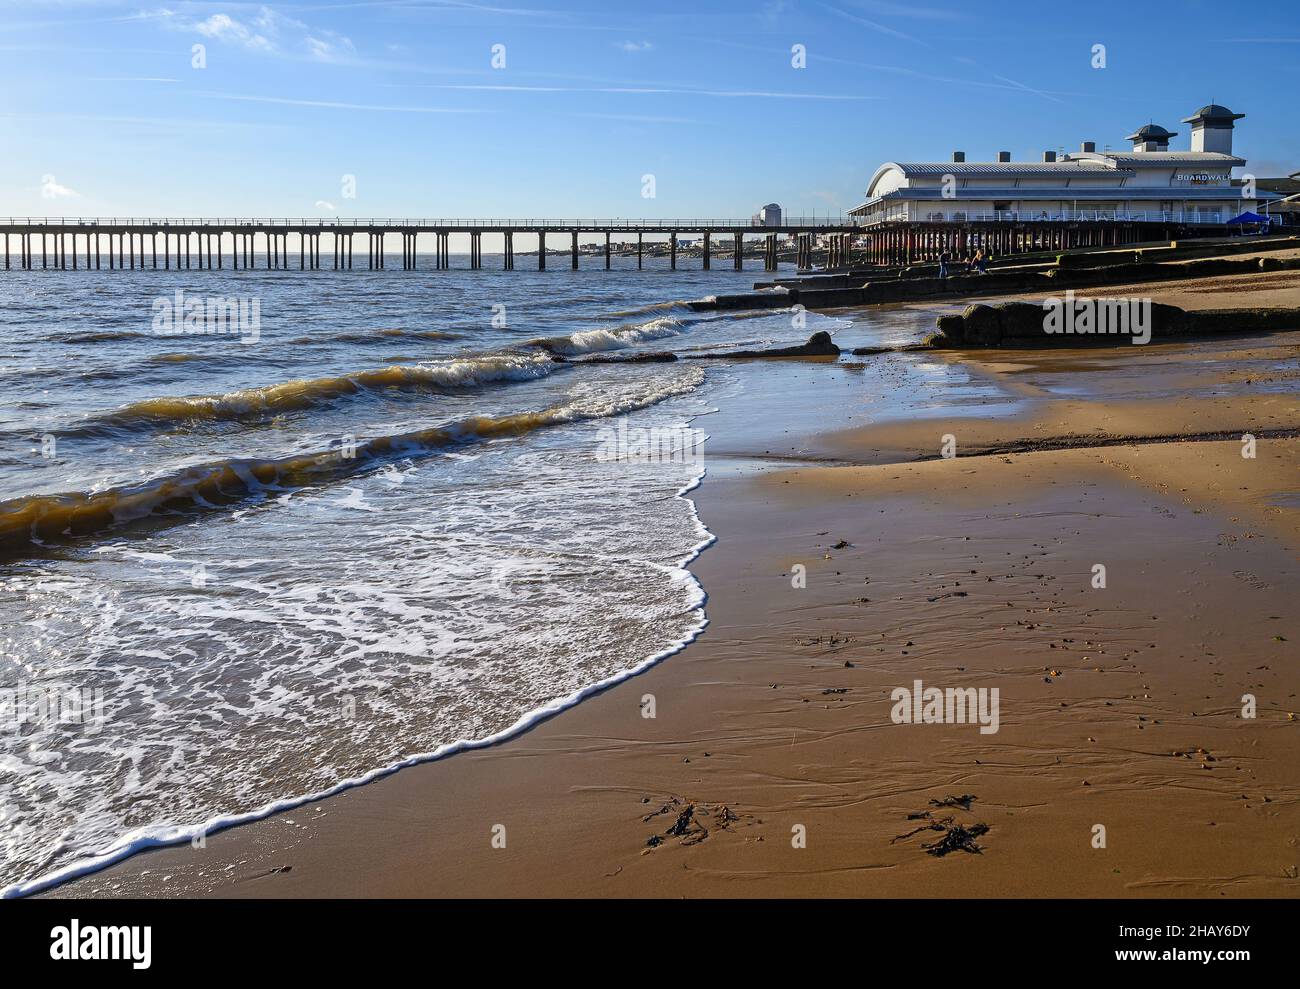 Felixstowe, Suffolk, UK: Waves lap against the sandy beach in the English resort town of Felixstowe with the pier behind. Stock Photo